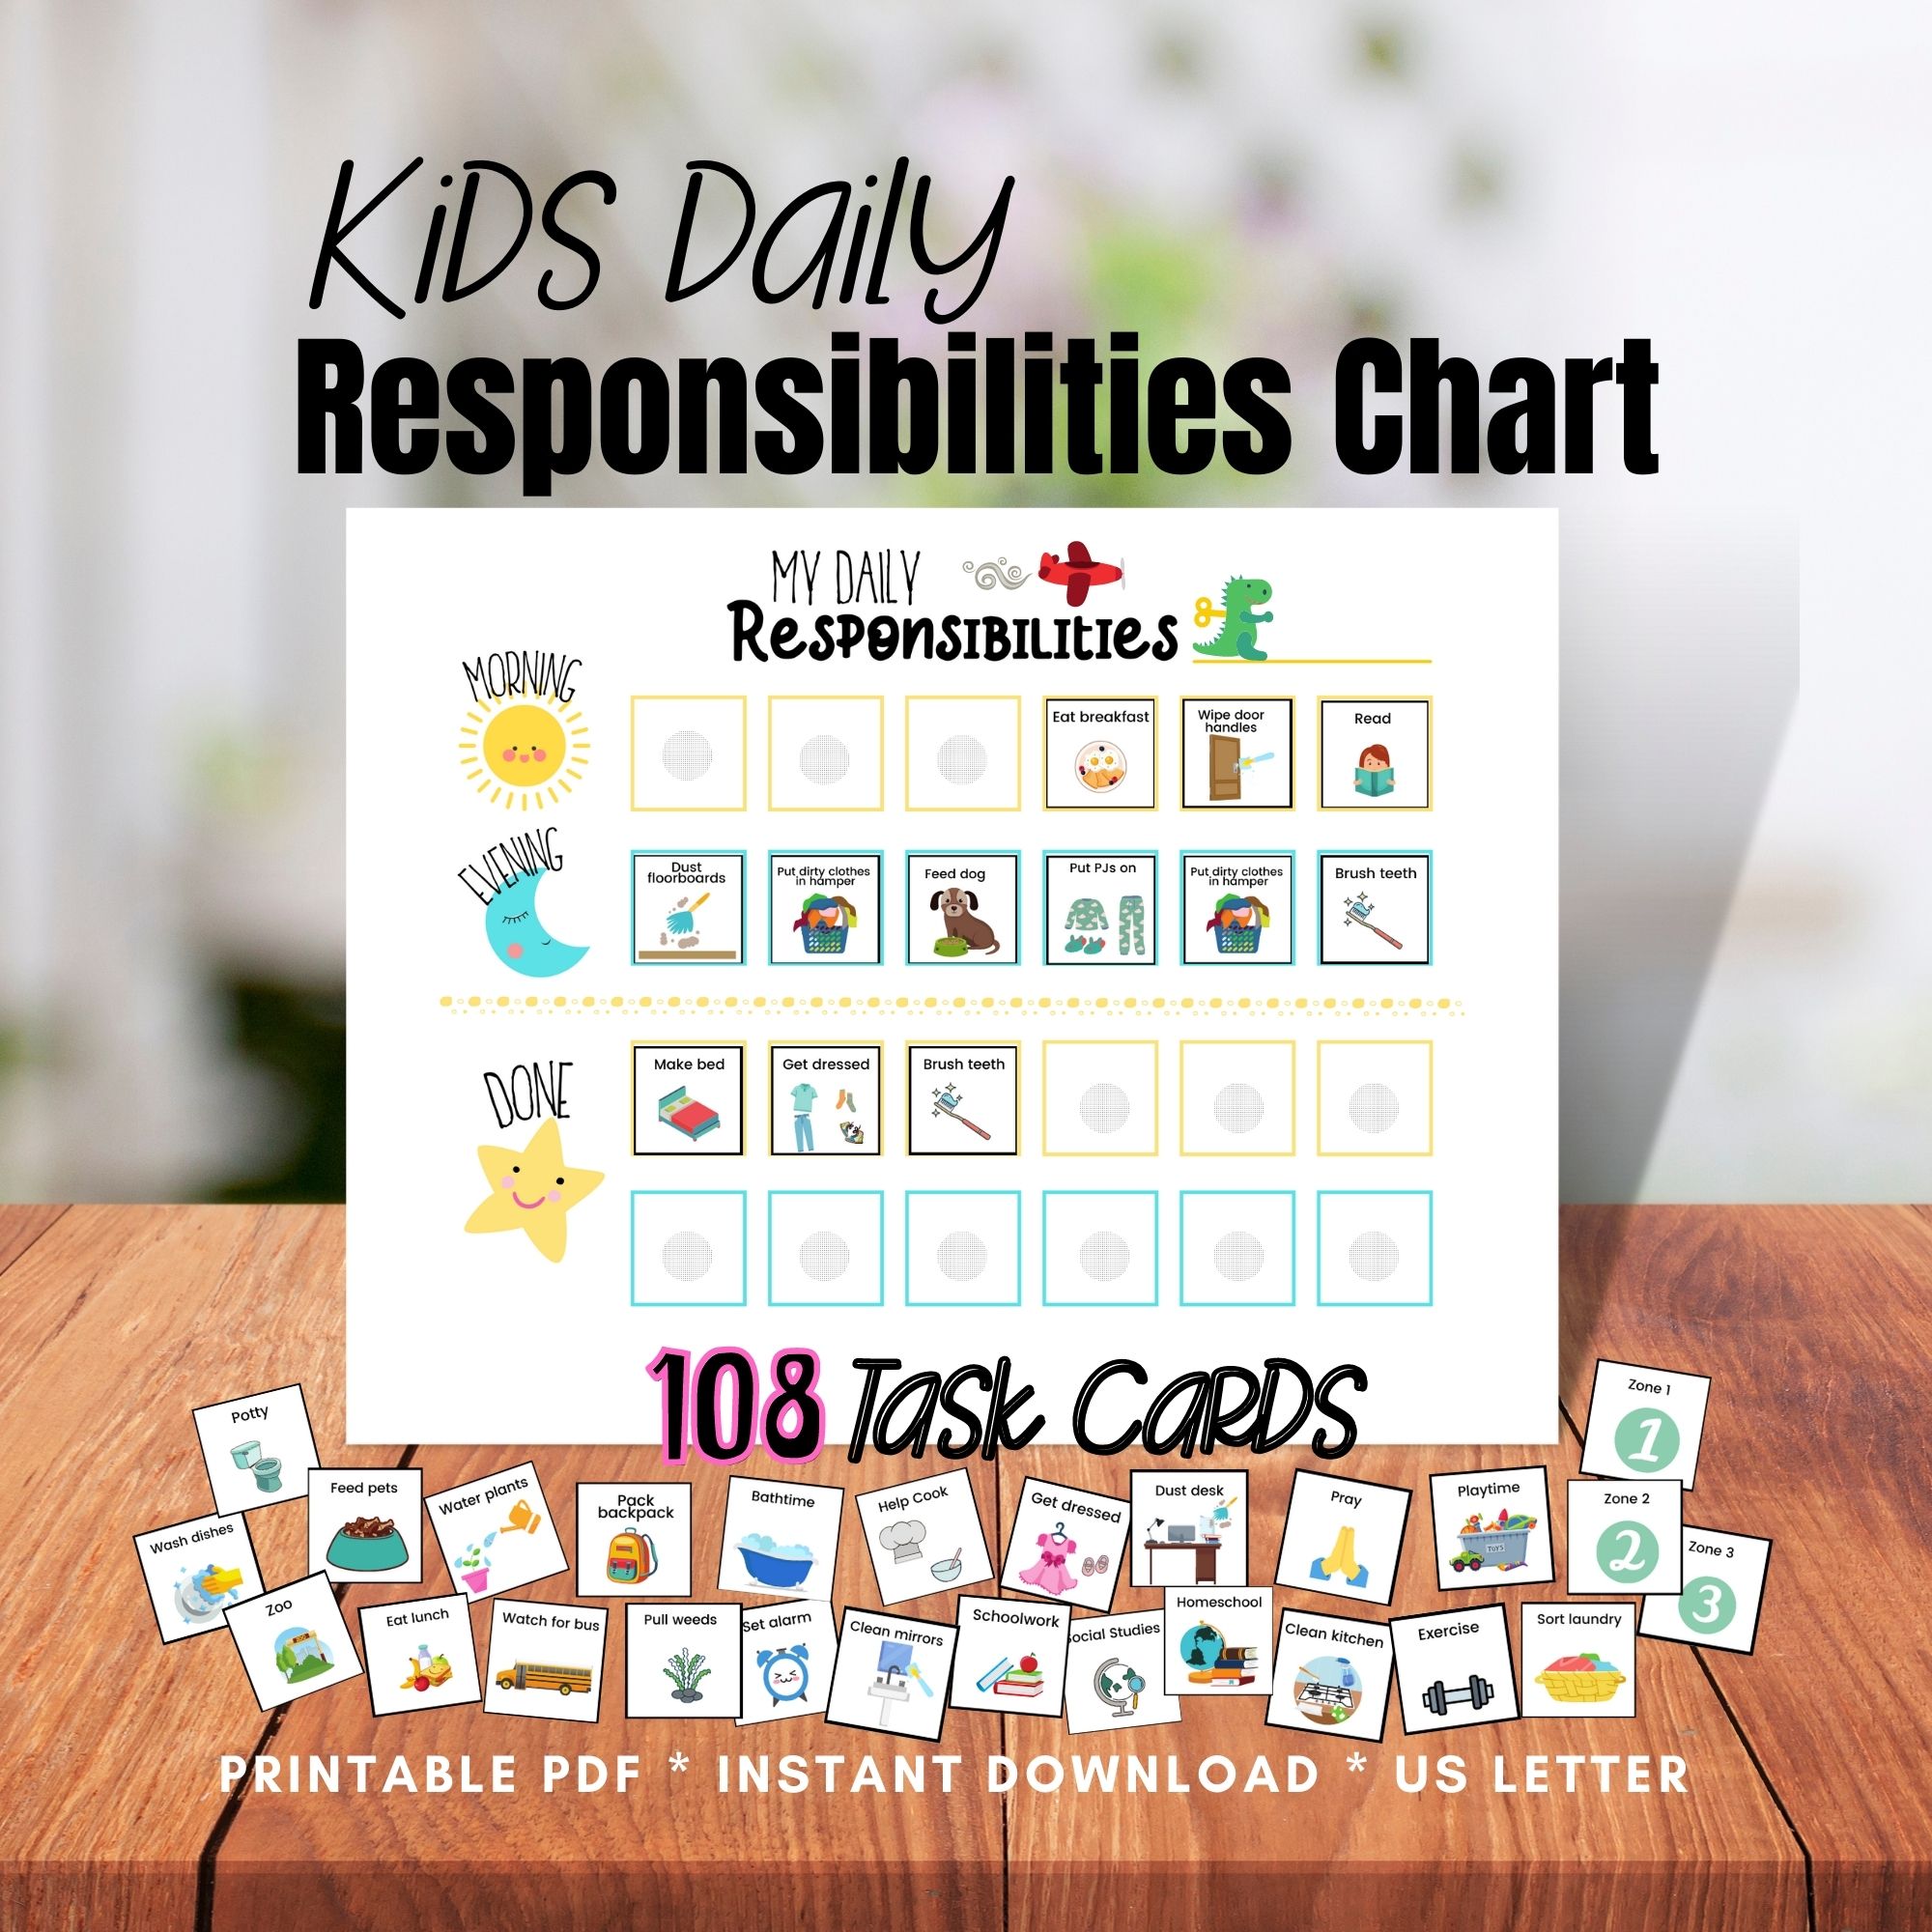 Kids Daily Responsibilities Chart and Task Cards Printable